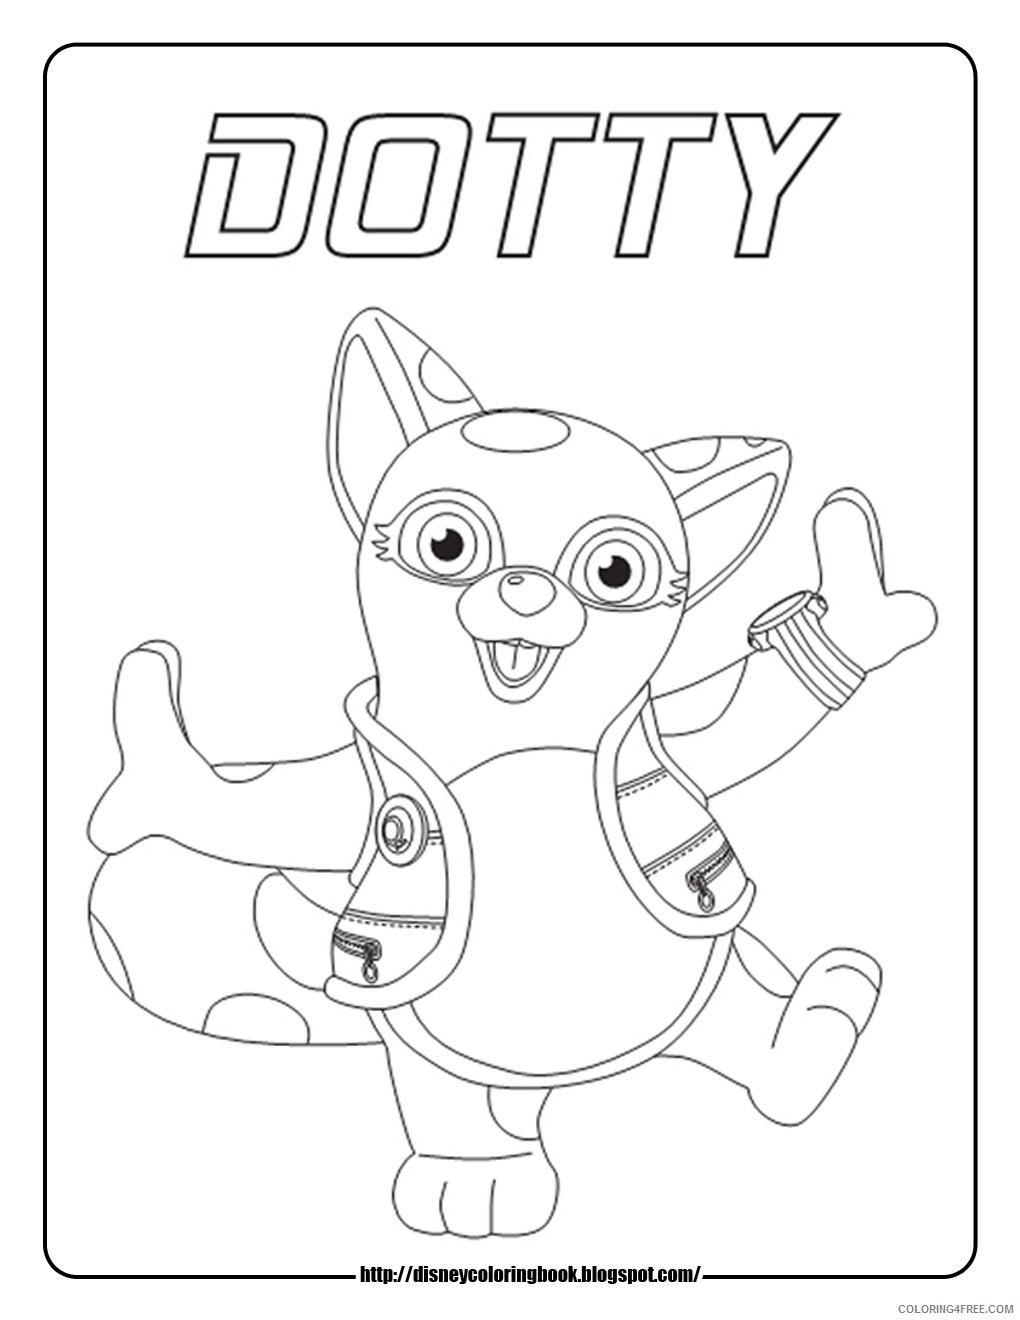 disney junior coloring pages dotty Coloring4free